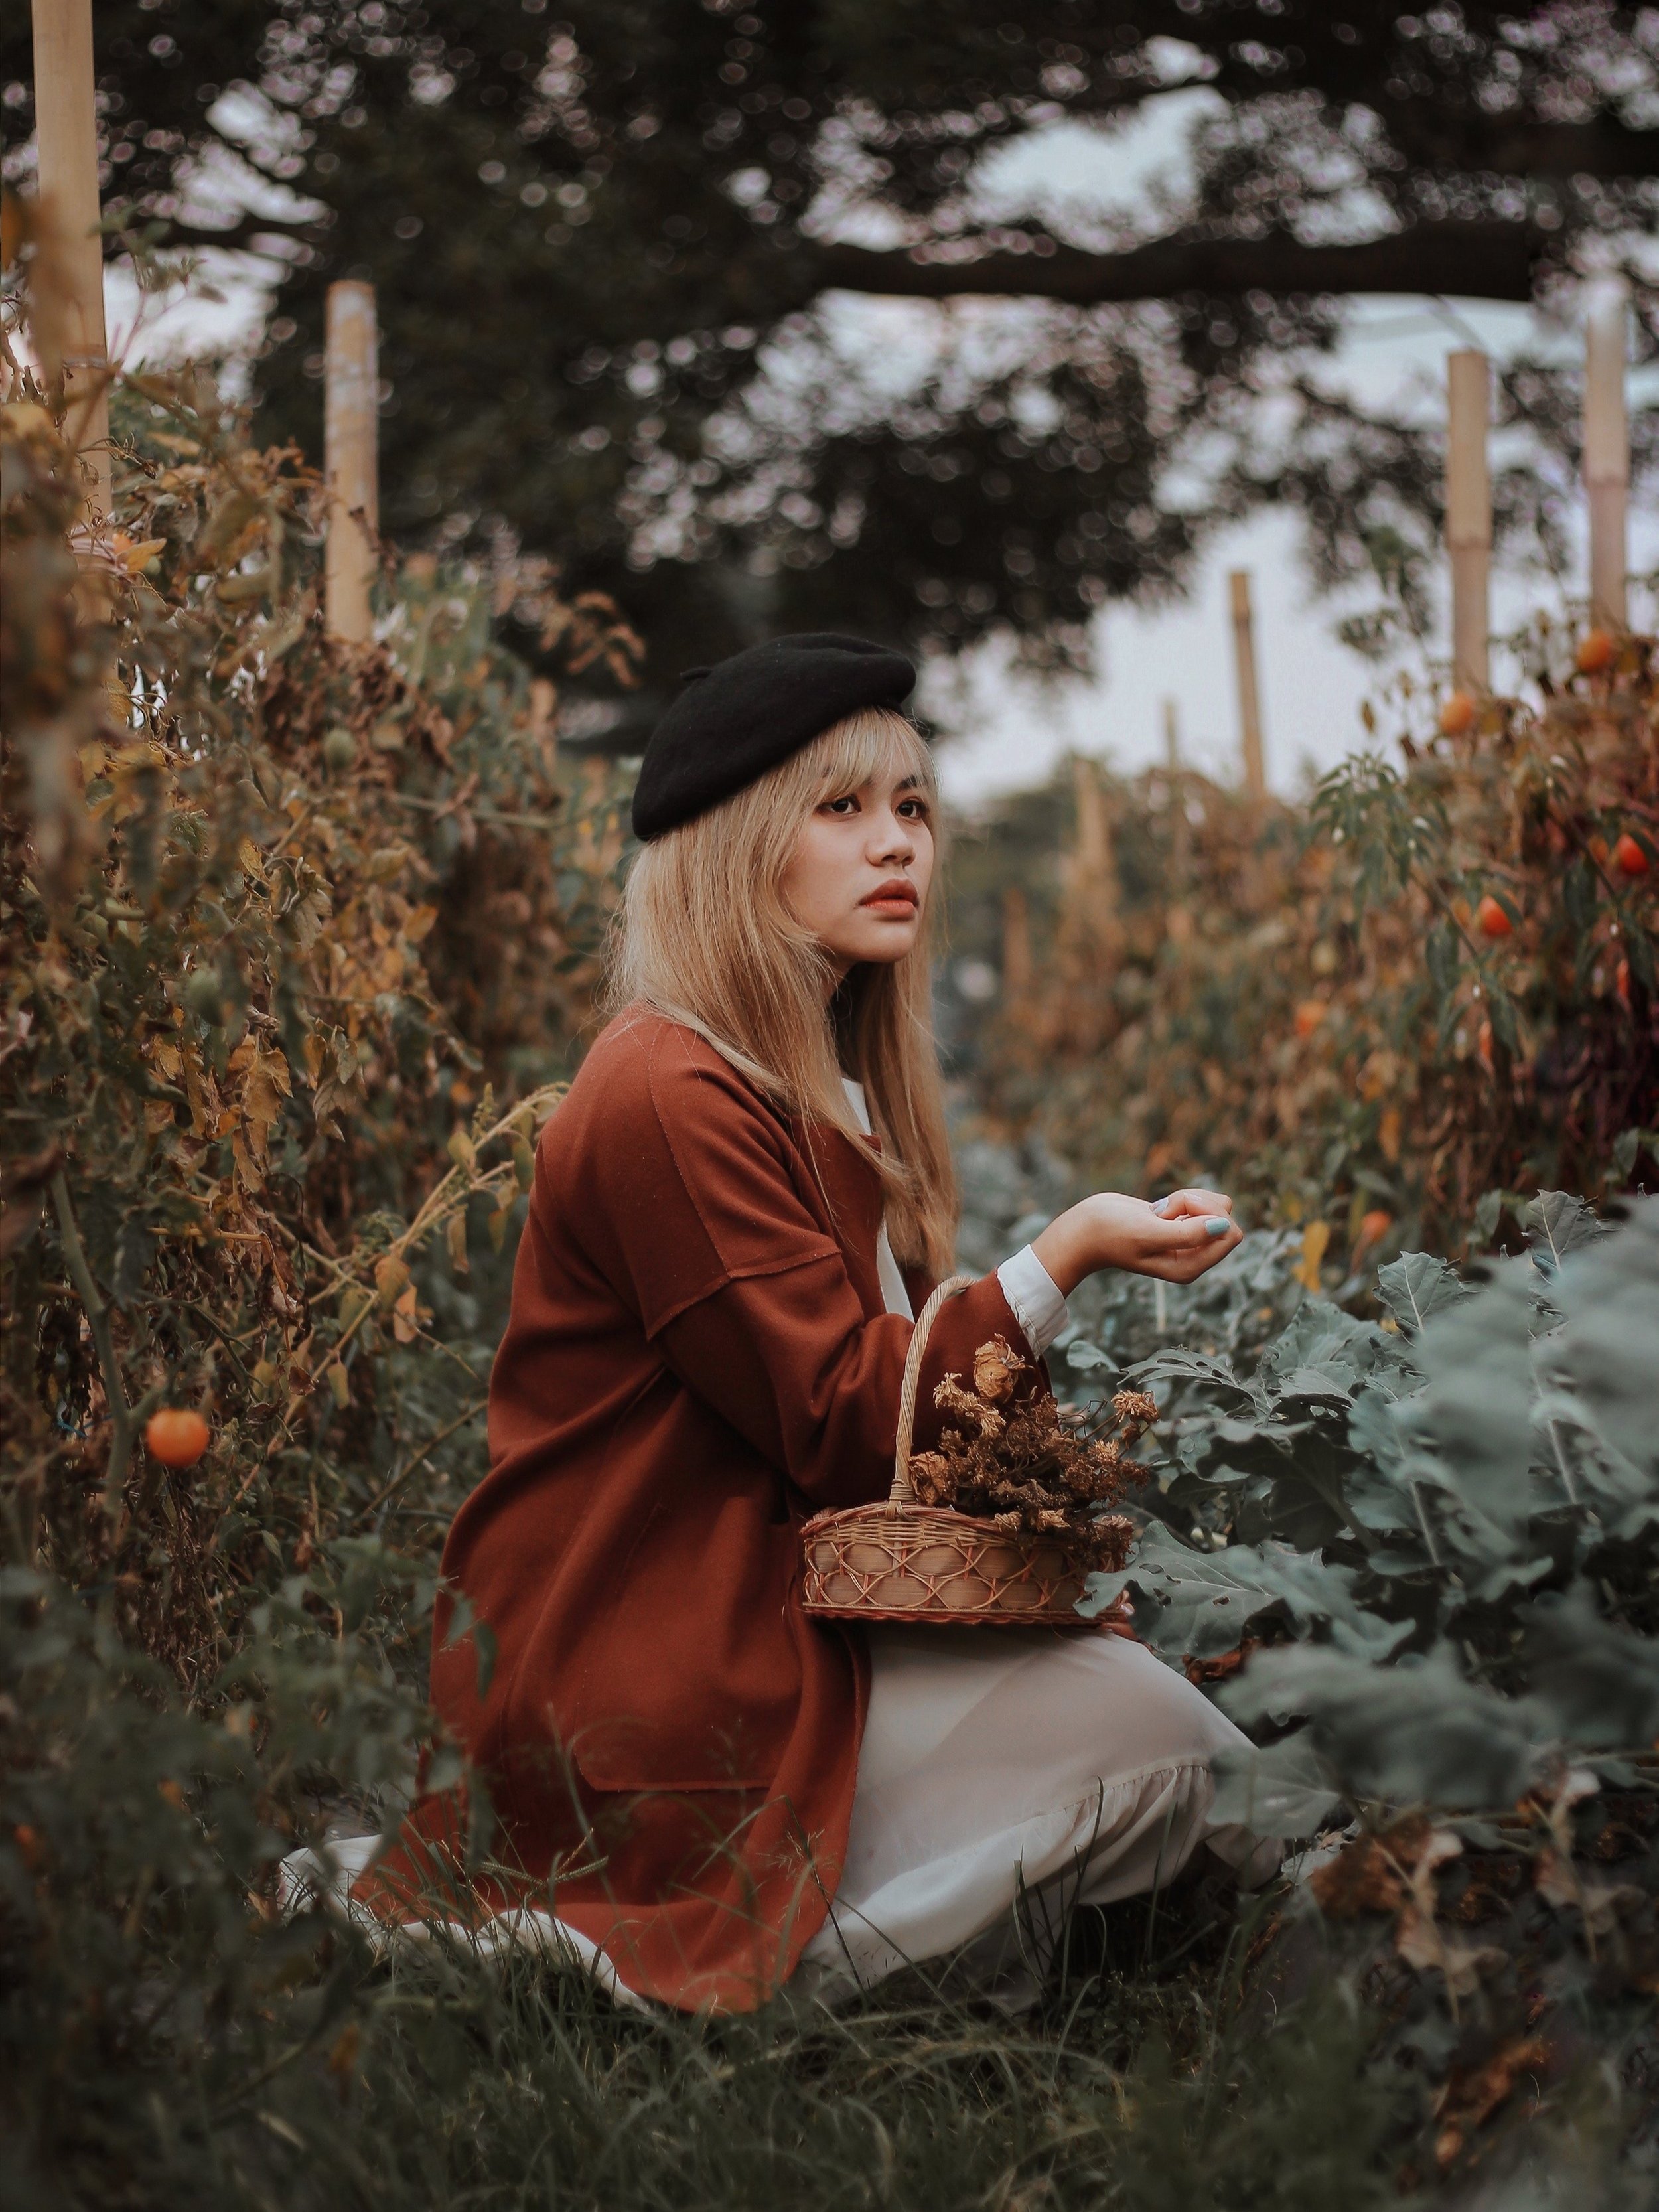 Your Guide to Creating Sustainable Fall Outfits Using Clothes You Already  Own — Sustainably Chic